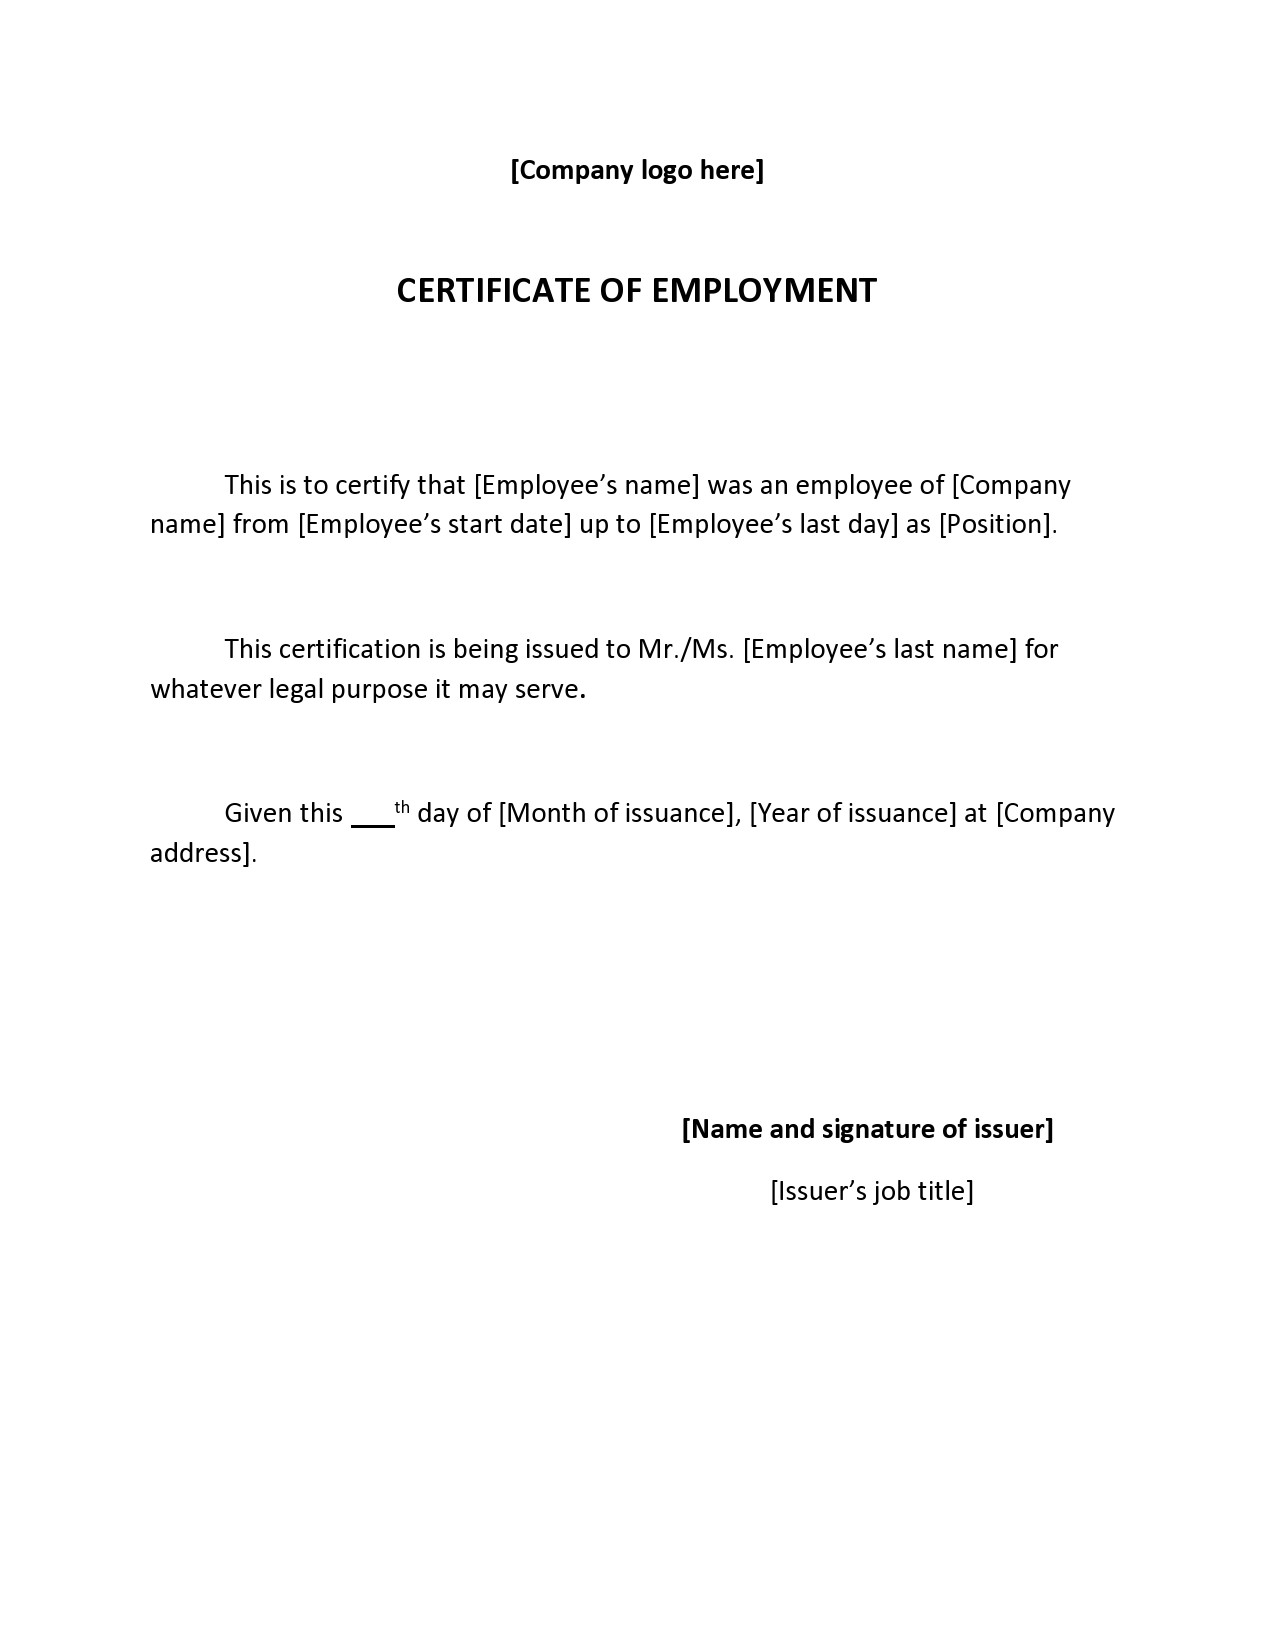 Sample Certificate Of Employment For Private Caregiver In Certificate